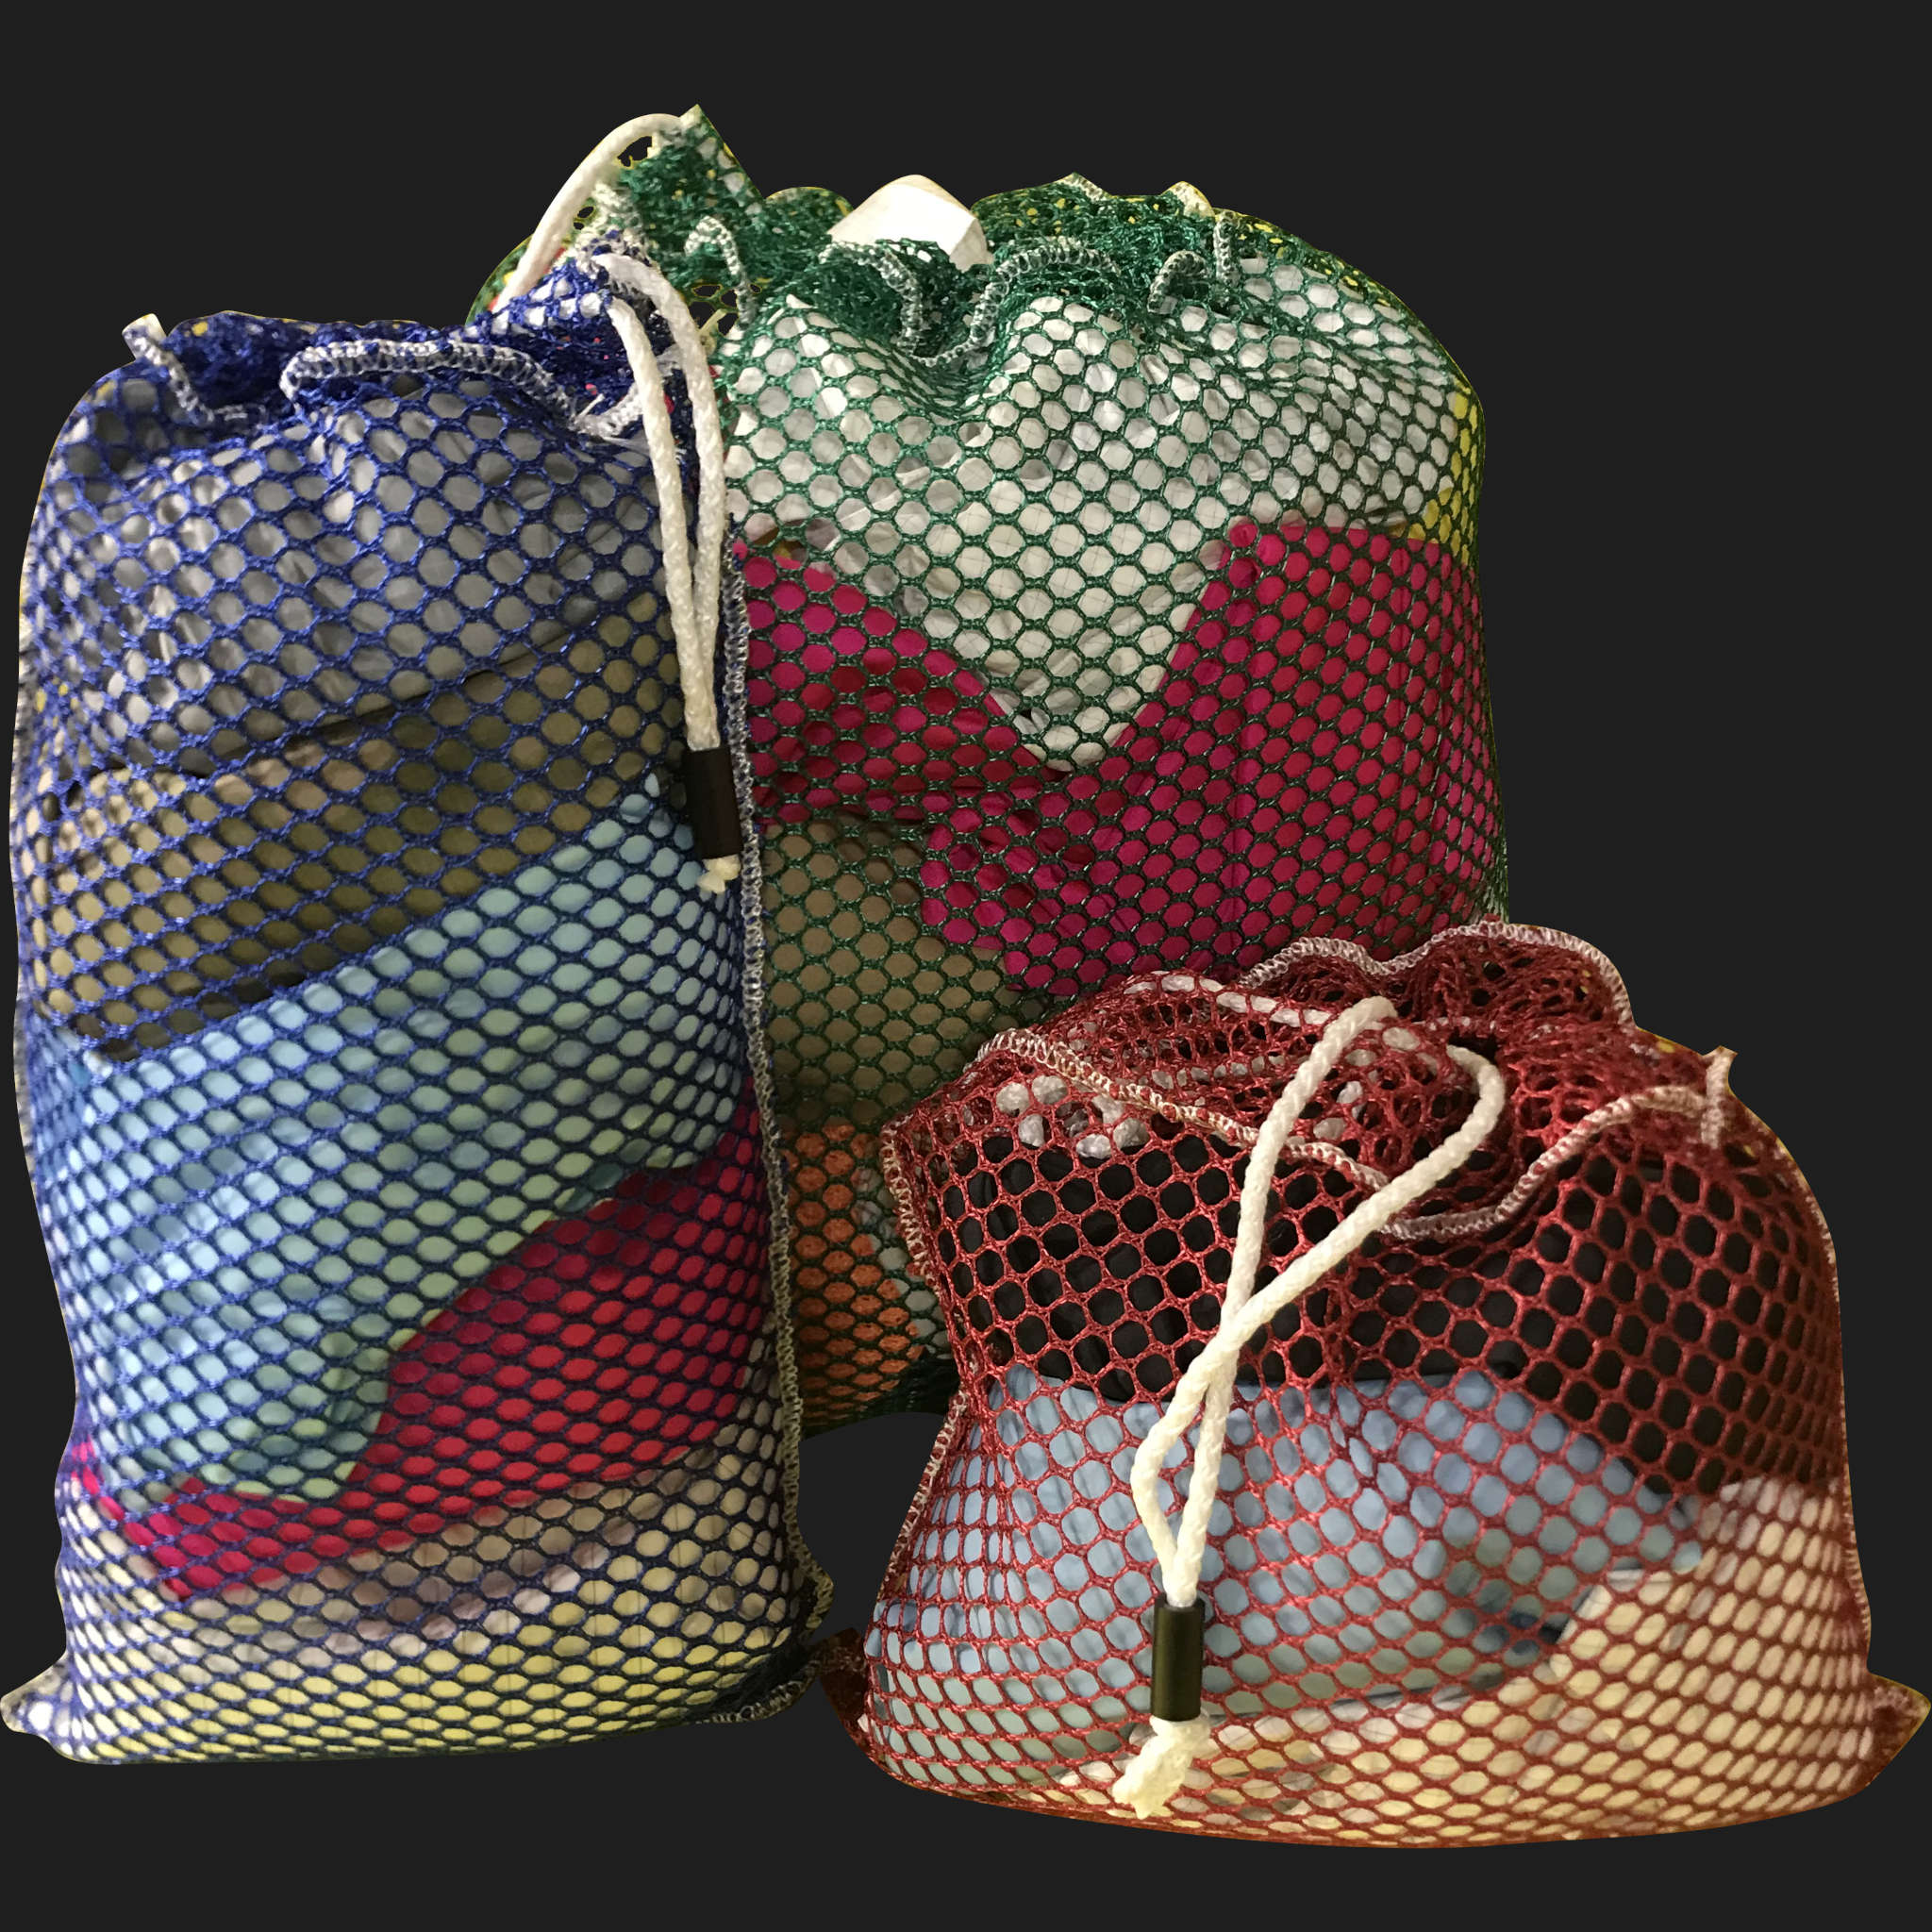 14" x 38" Customized Mesh-Net-Laundry Bags Heavy Duty with Cord and barrellock closure